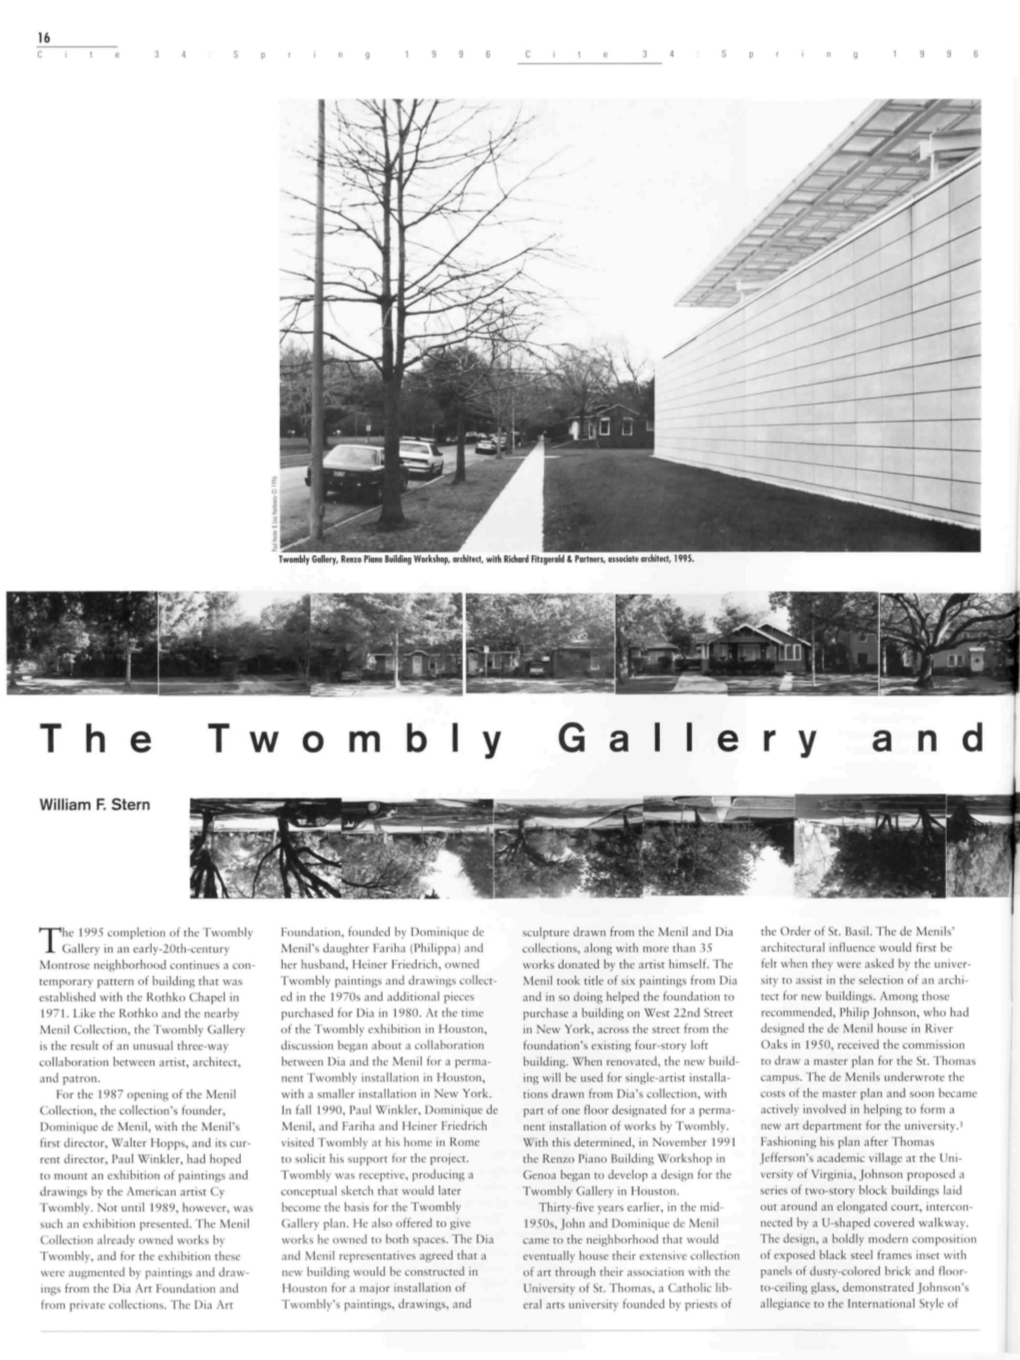 The Twombly Gallery